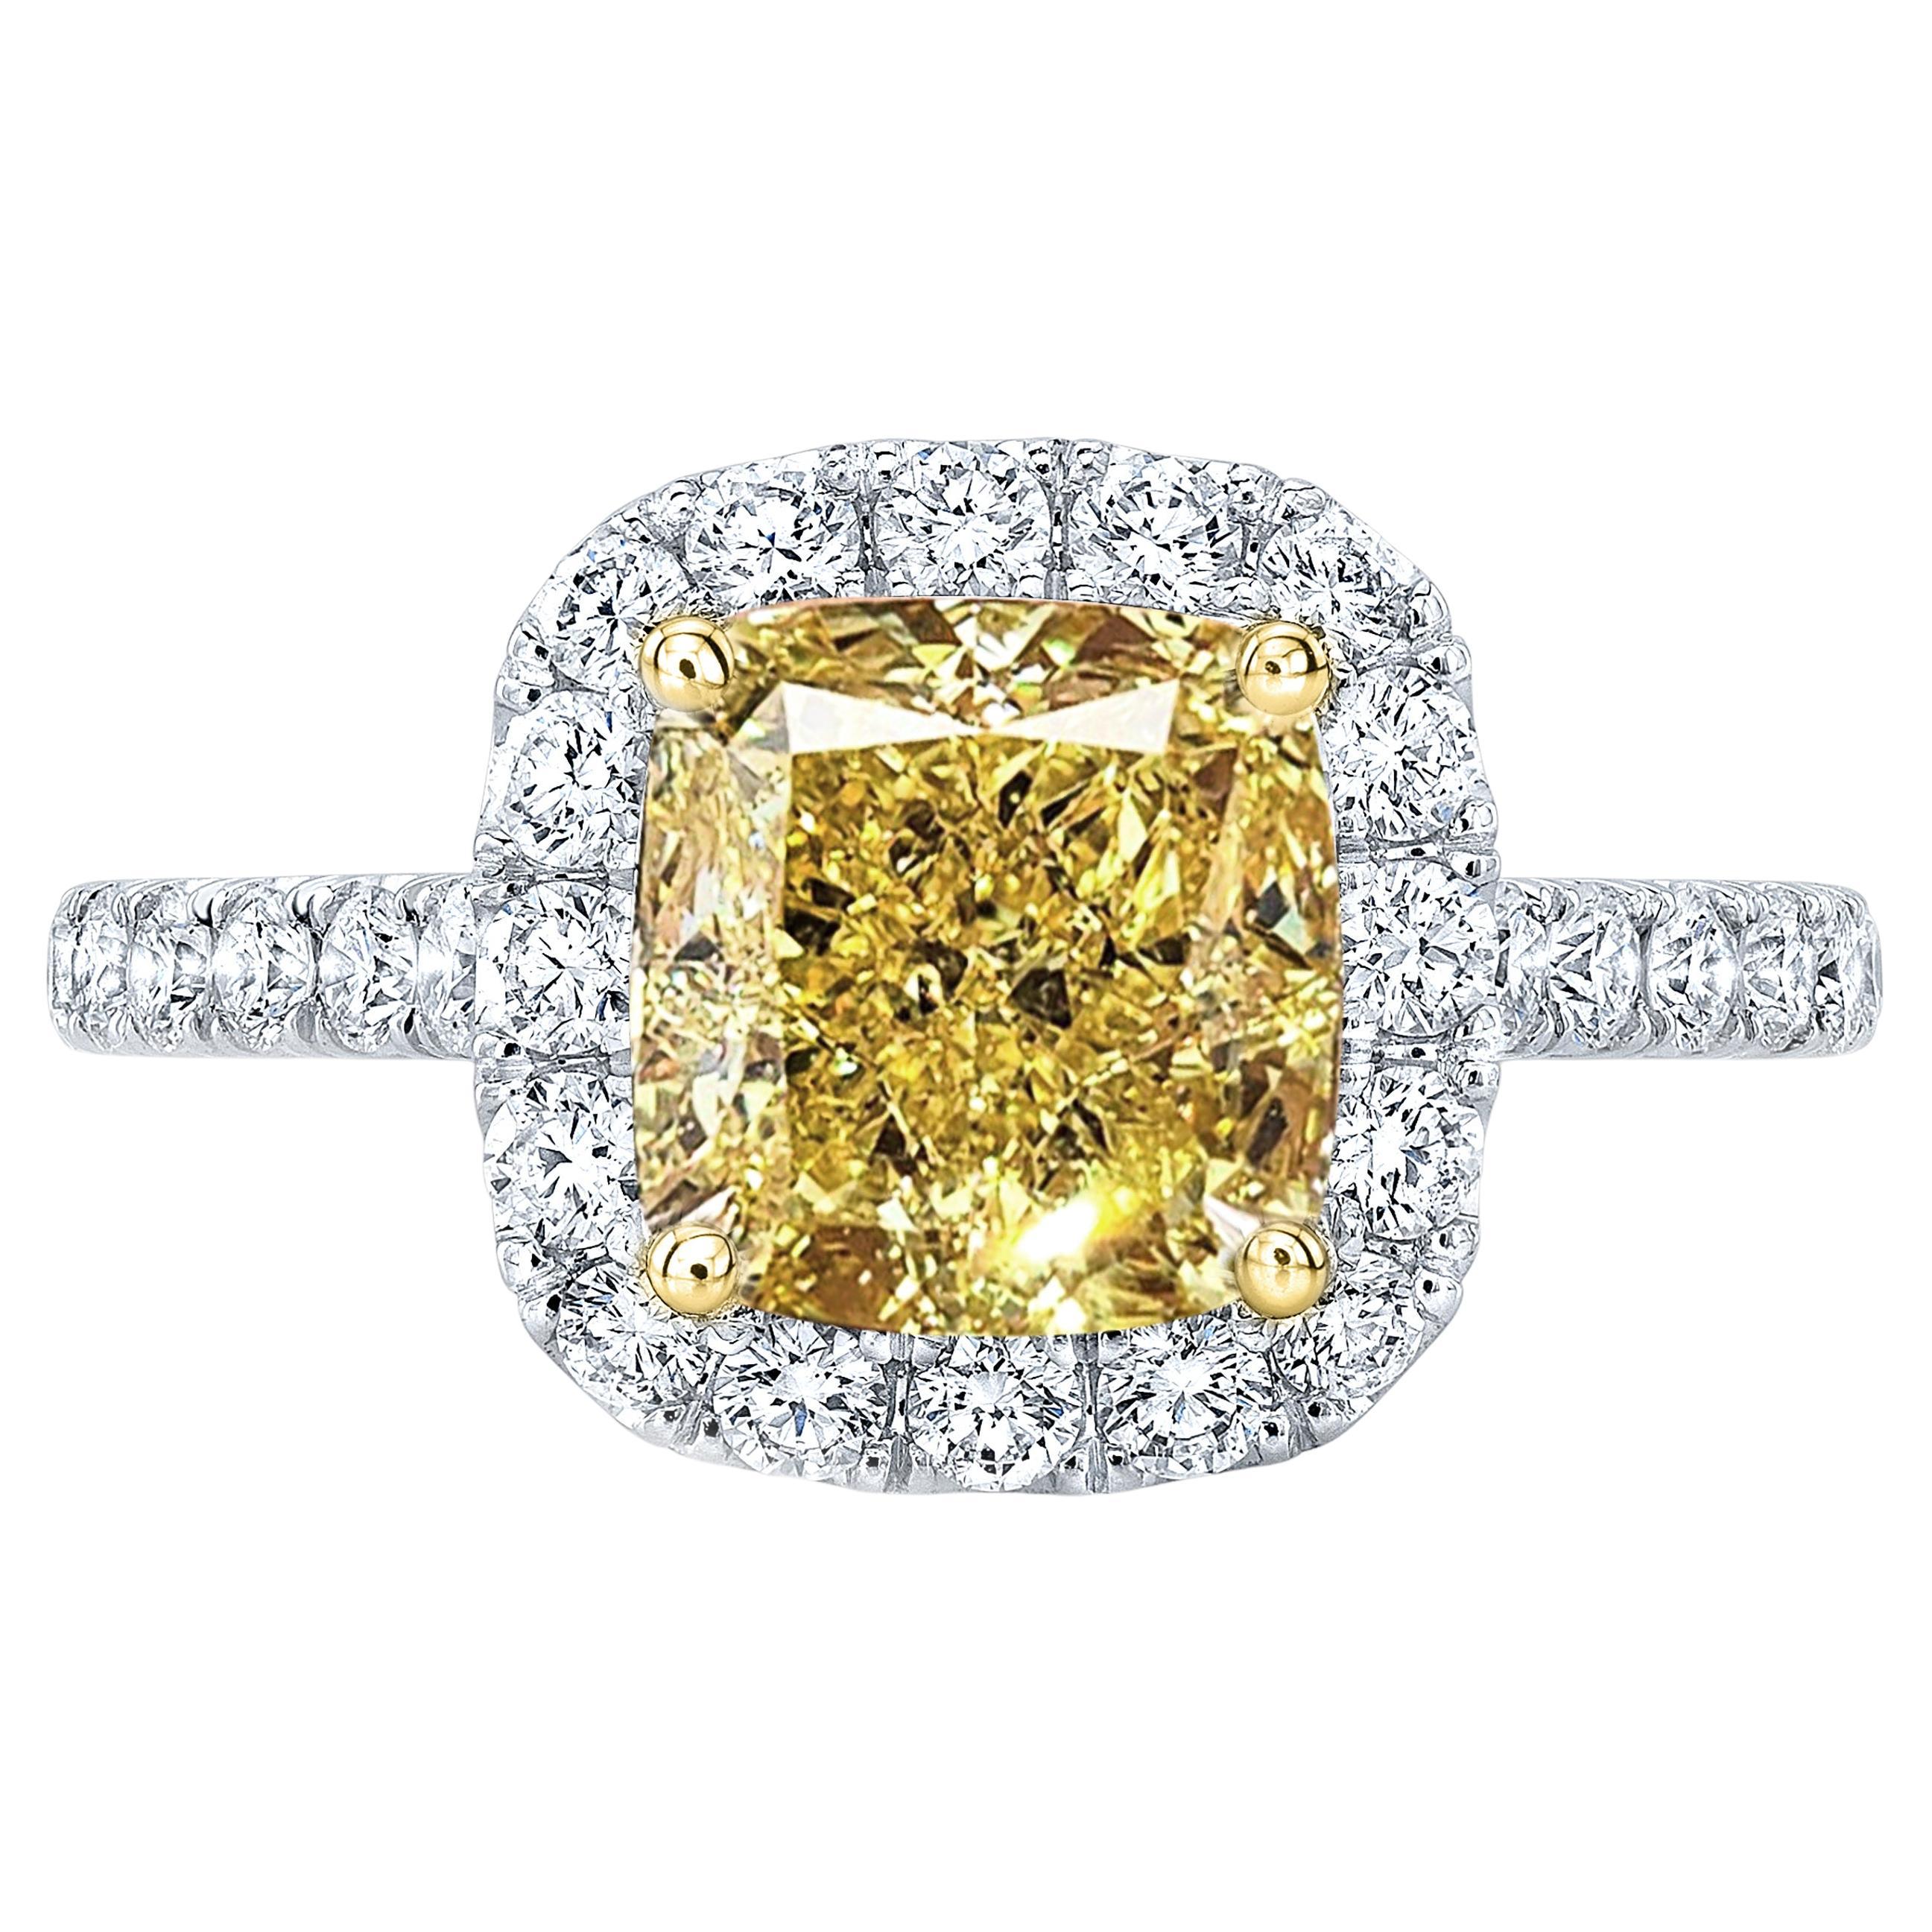 2.60 Ct. Canary Fancy Yellow Halo Cushion Cut Engagement Ring VS2 GIA Certified For Sale